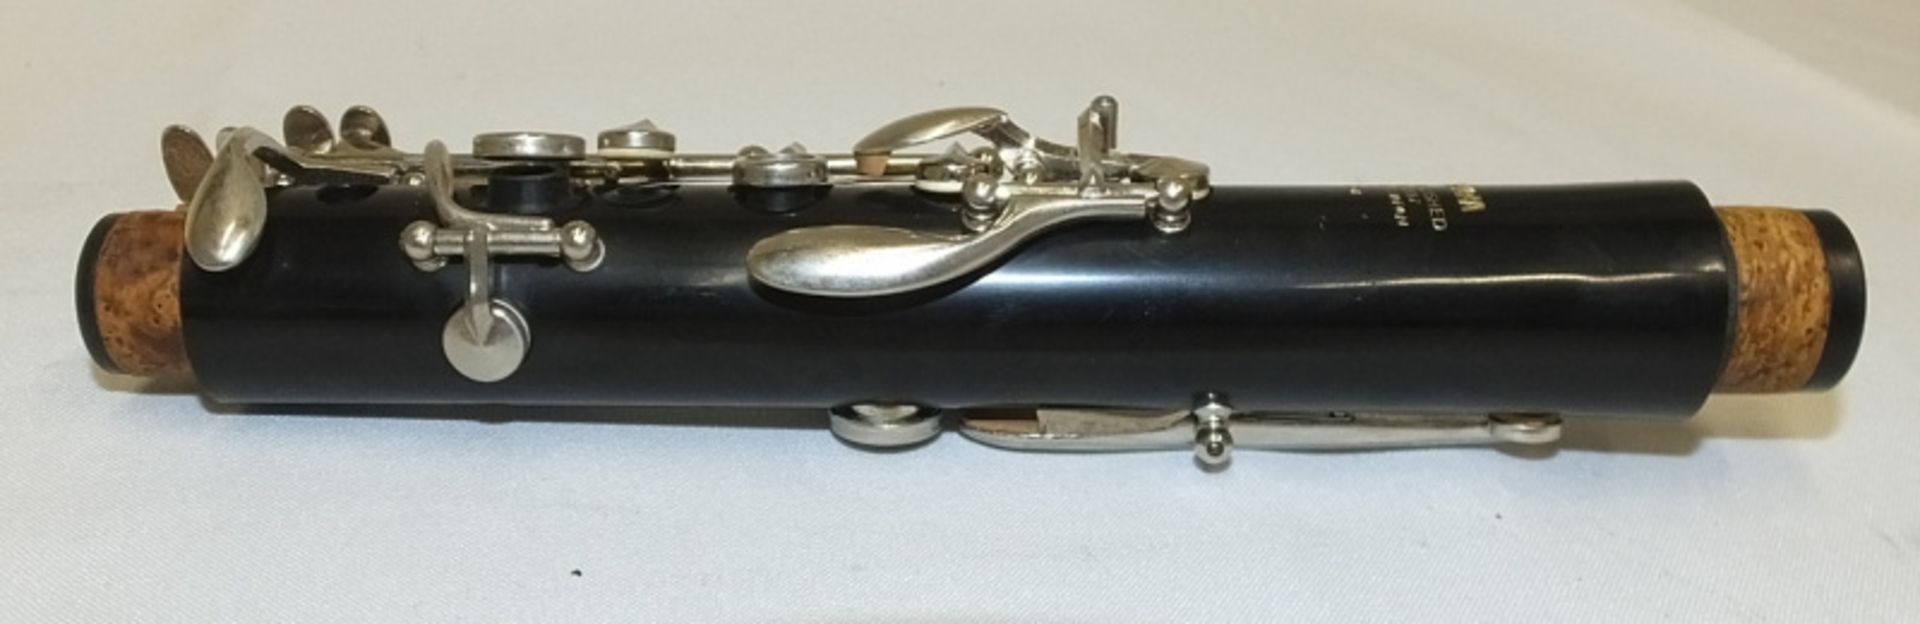 Yamaha 26II Clarinet (incomplete - no mouthpiece) in case - serial number 083375 - Image 4 of 13